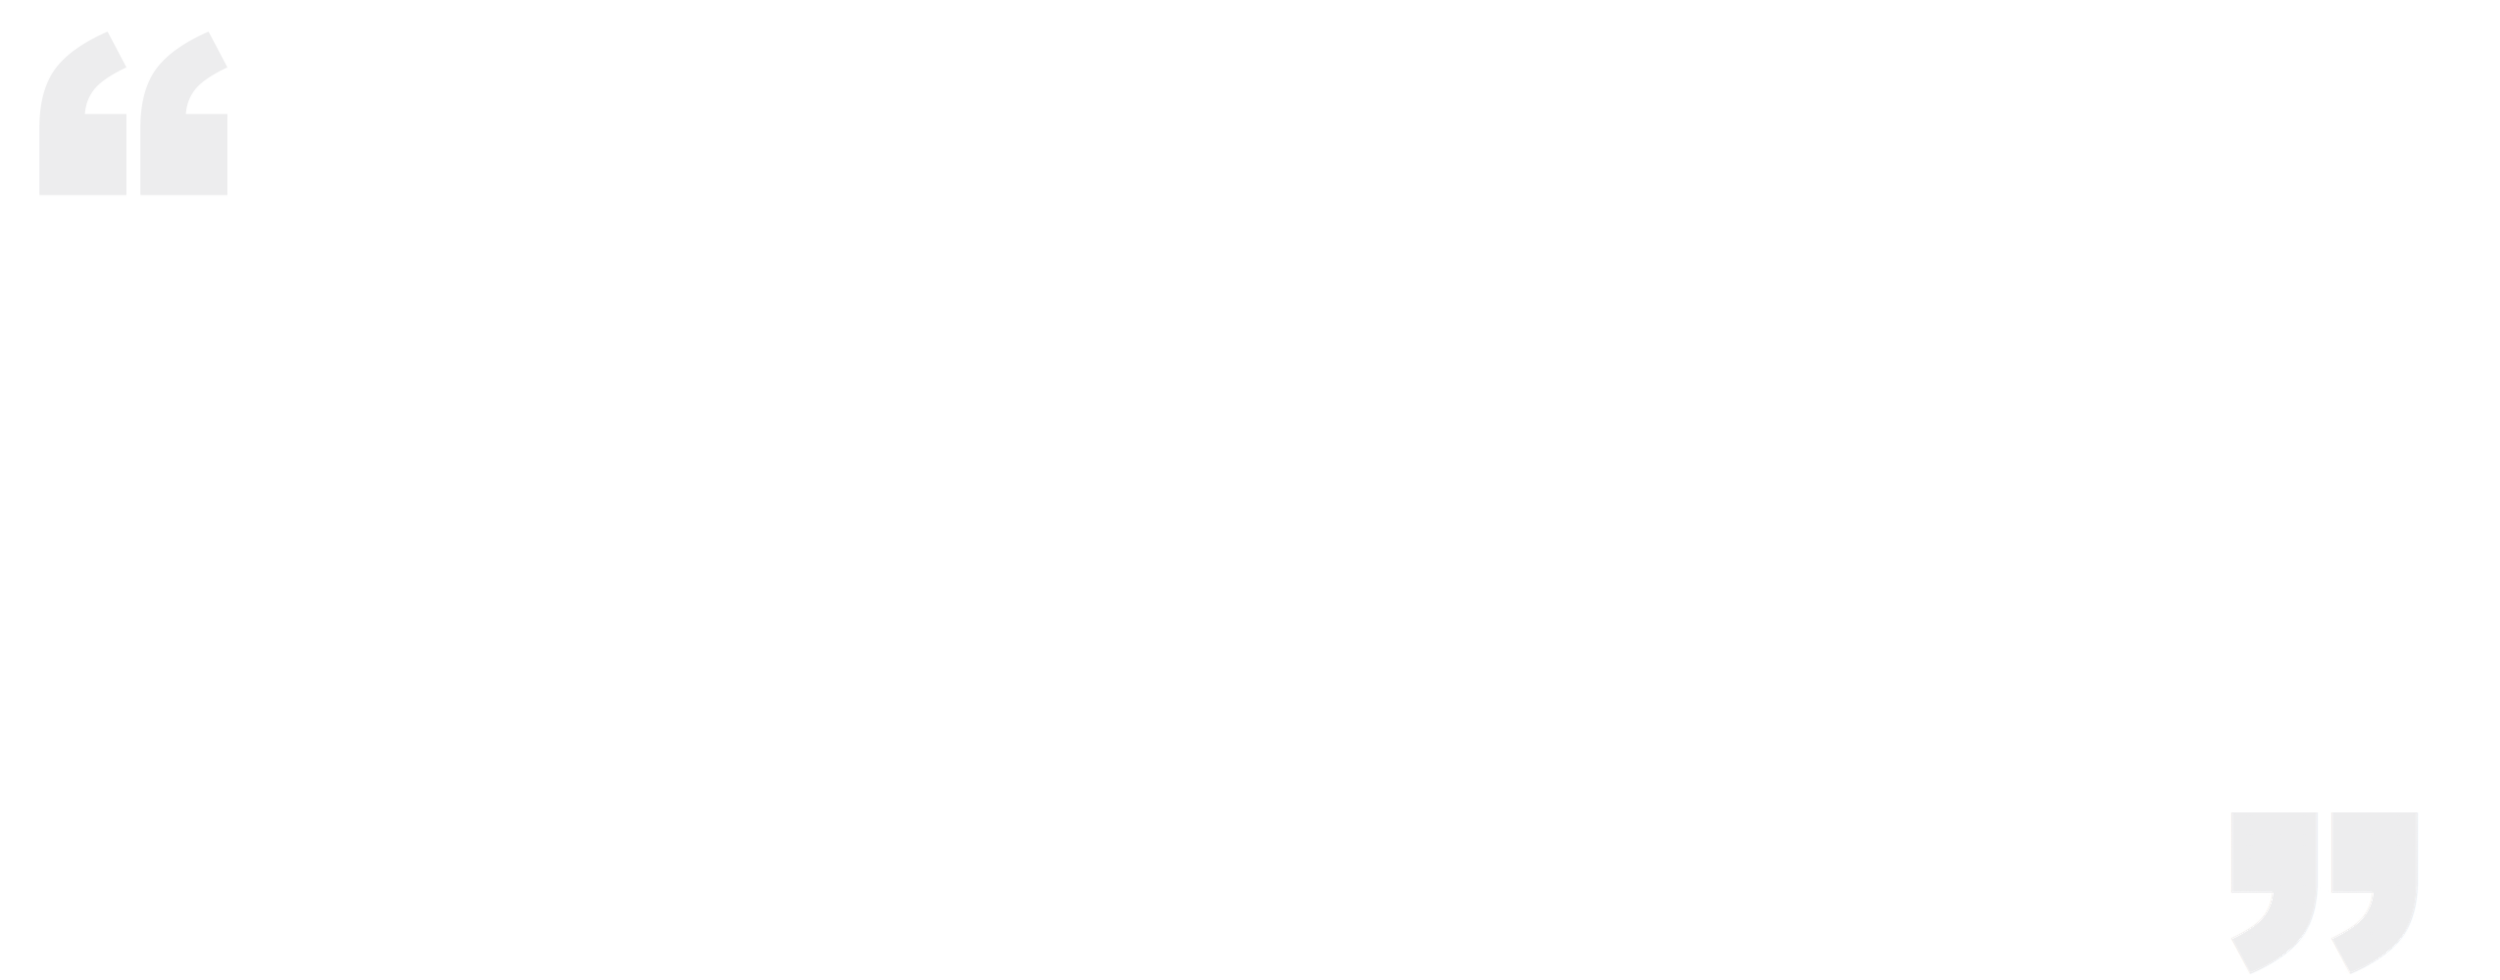 Residential - Josh Altman Quote.png